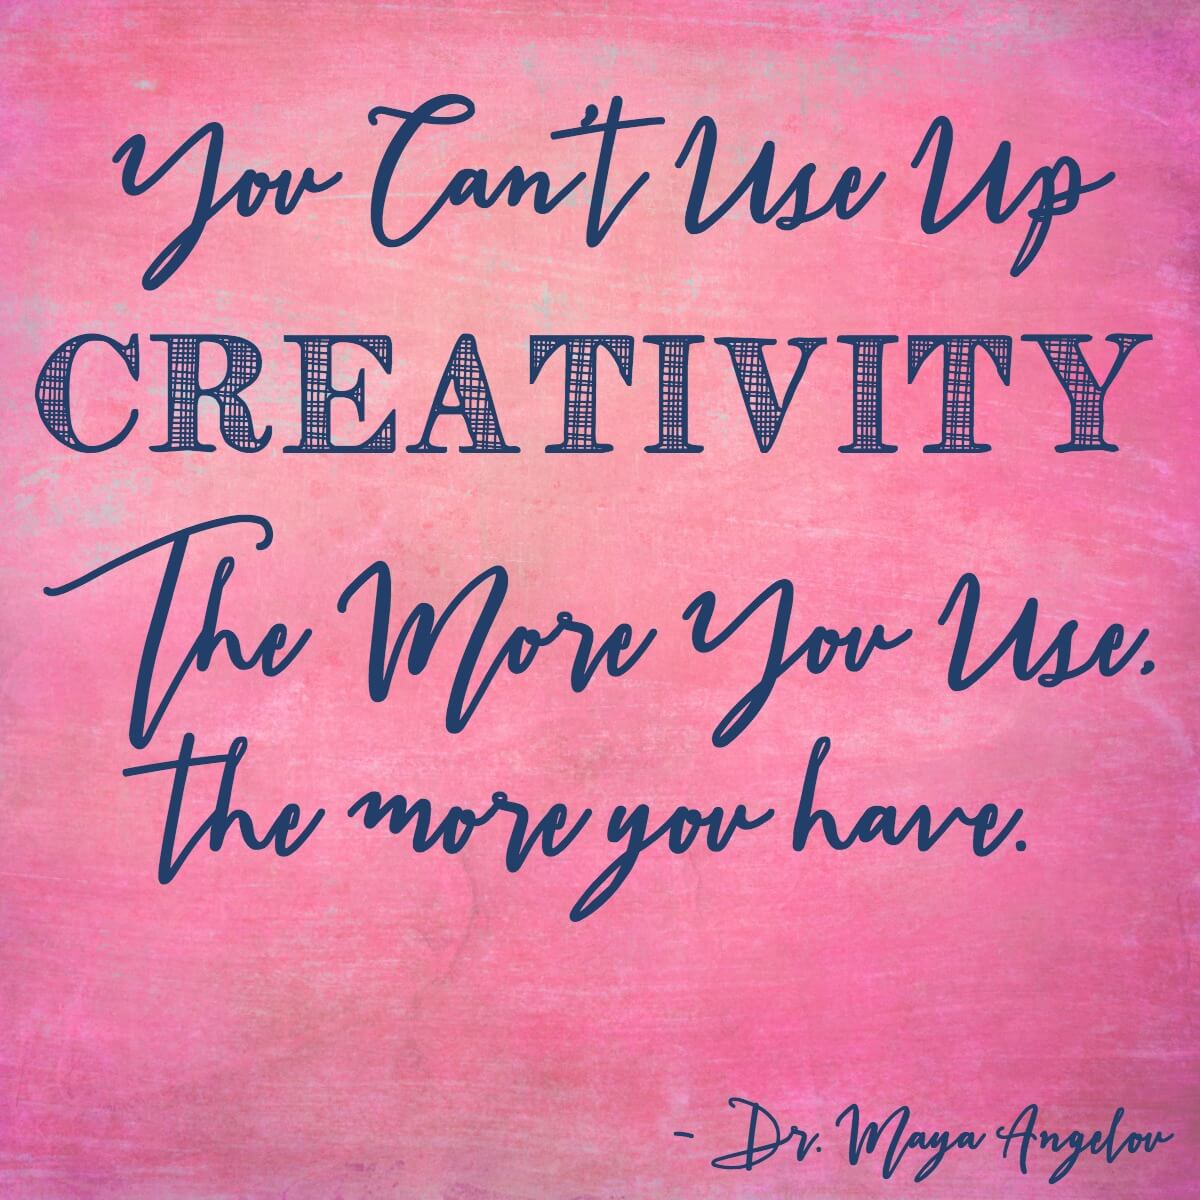 Have you ever wondered if there are creative things to do when you don't feel creative? Maybe creativity feels like something you weren't born with? Guess what? You can still explore your creativity and do creative things! www.themidlifemamas.com